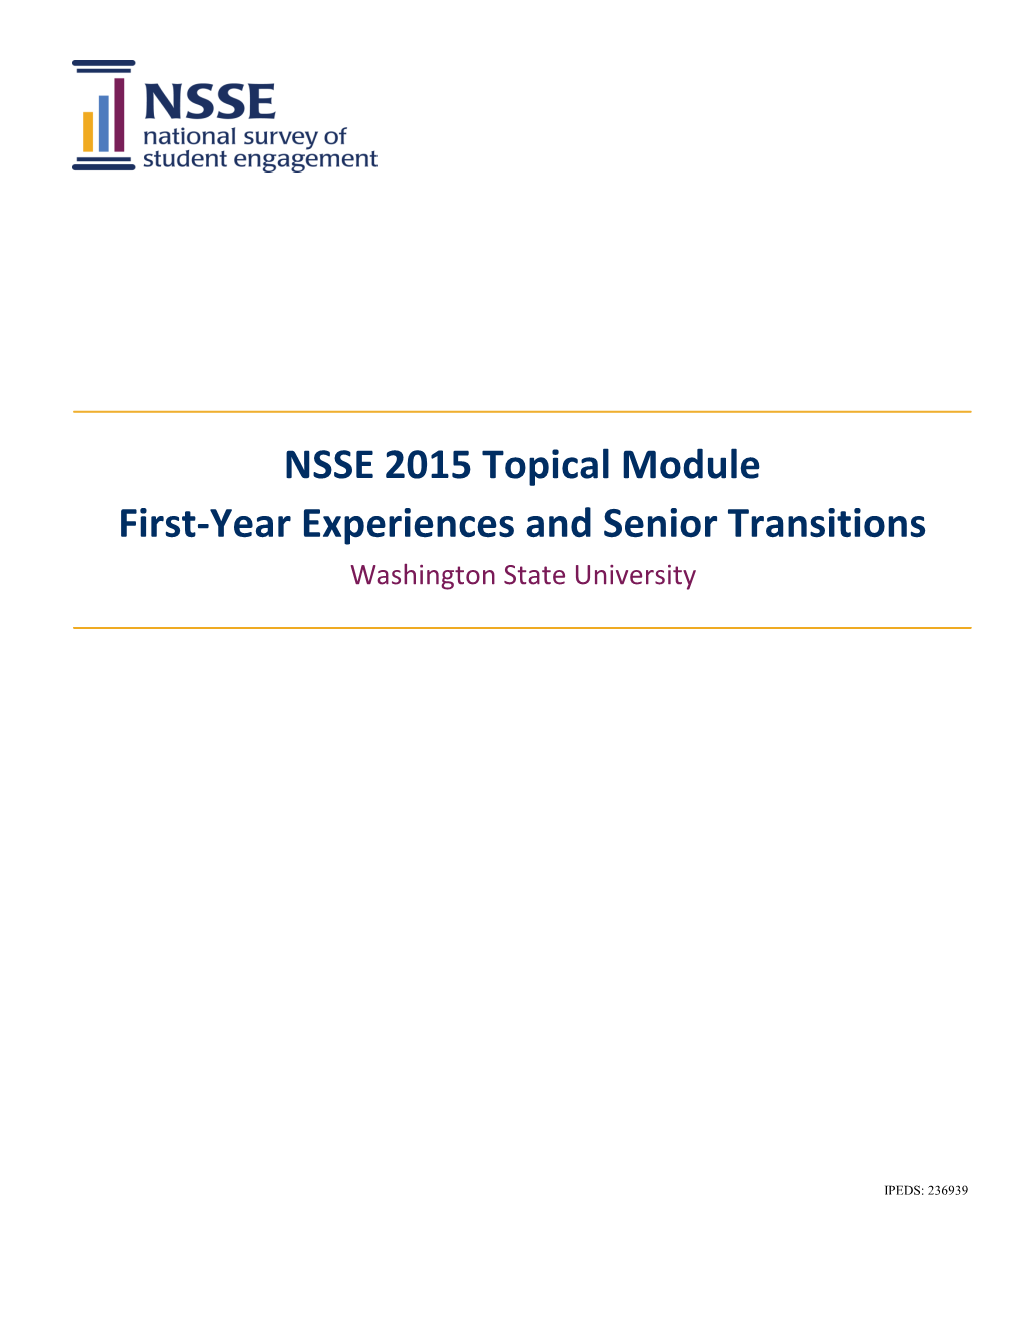 NSSE 2015 Topical Module First-Year Experiences and Senior Transitions Washington State University